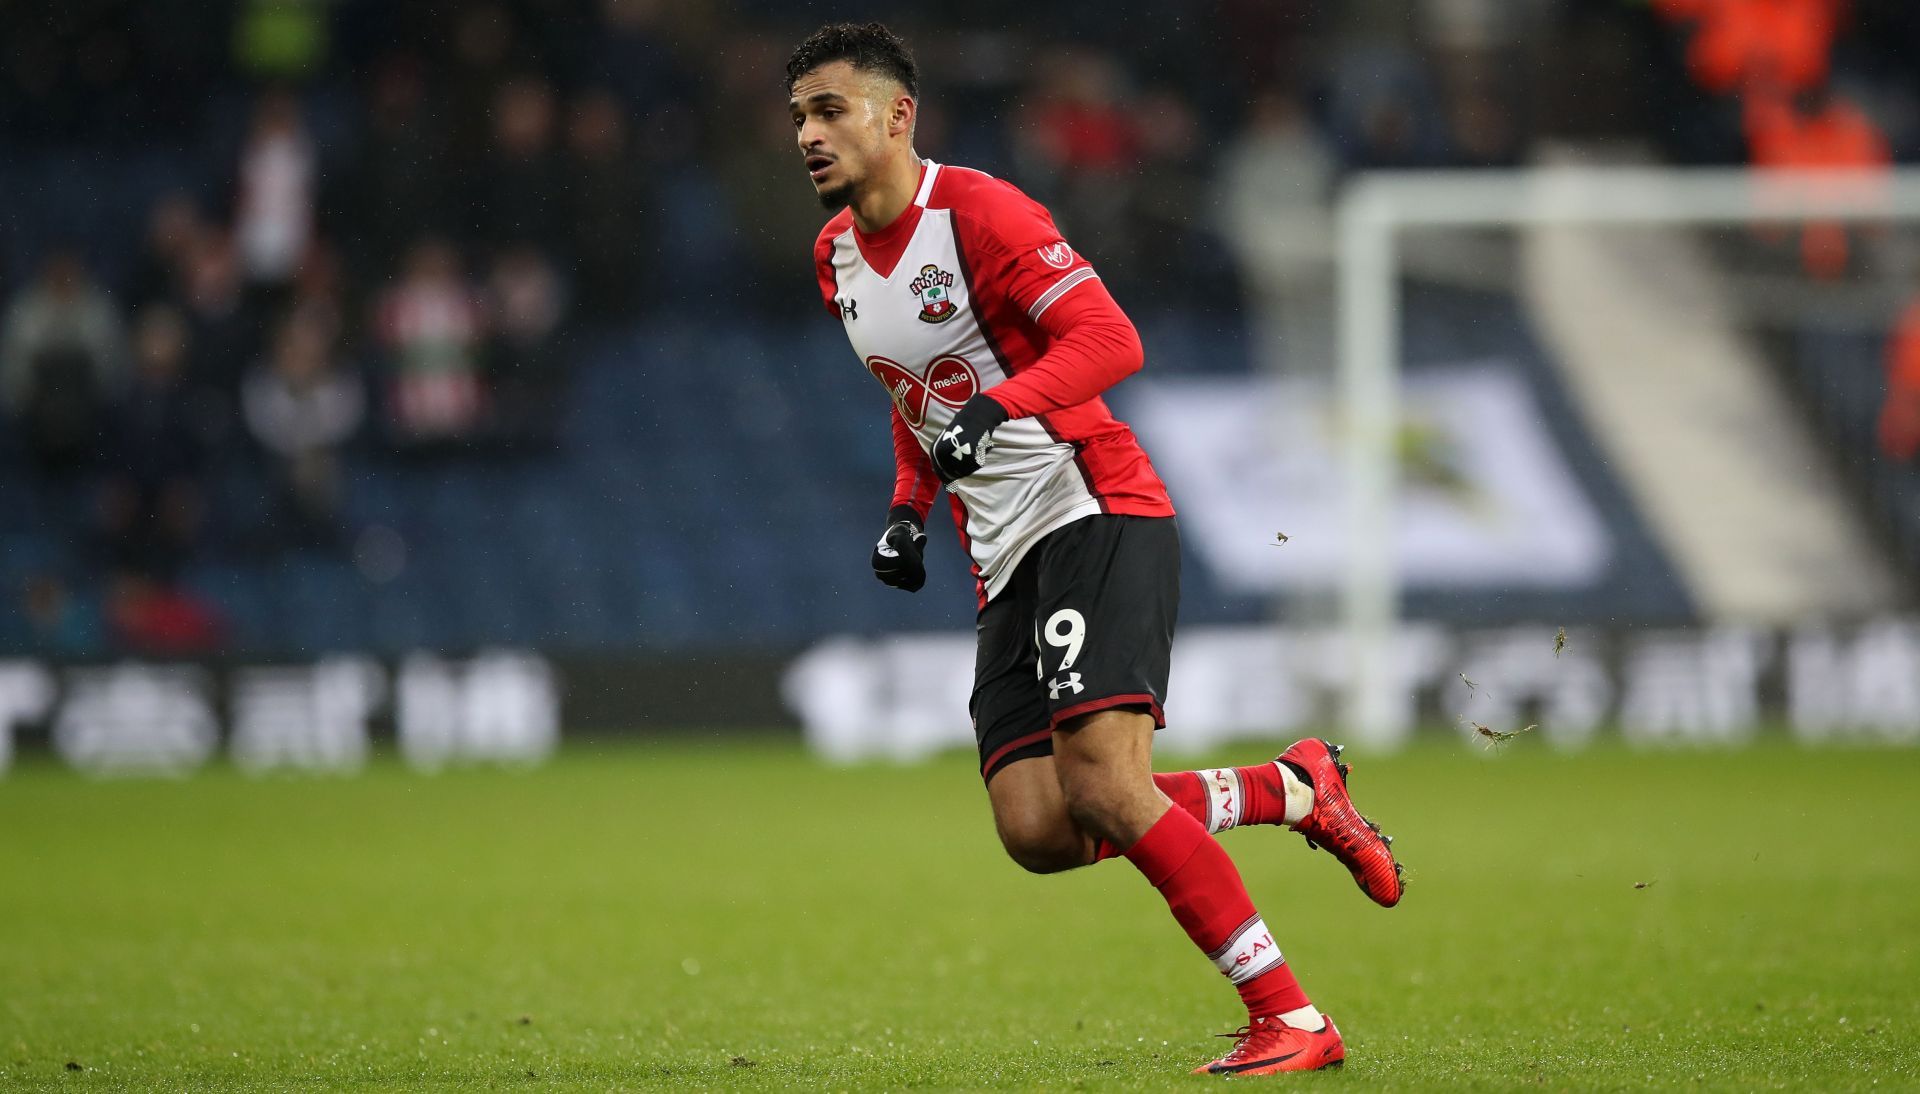 Angers forward Sofiane Boufal was called up by Morocco for AFCON